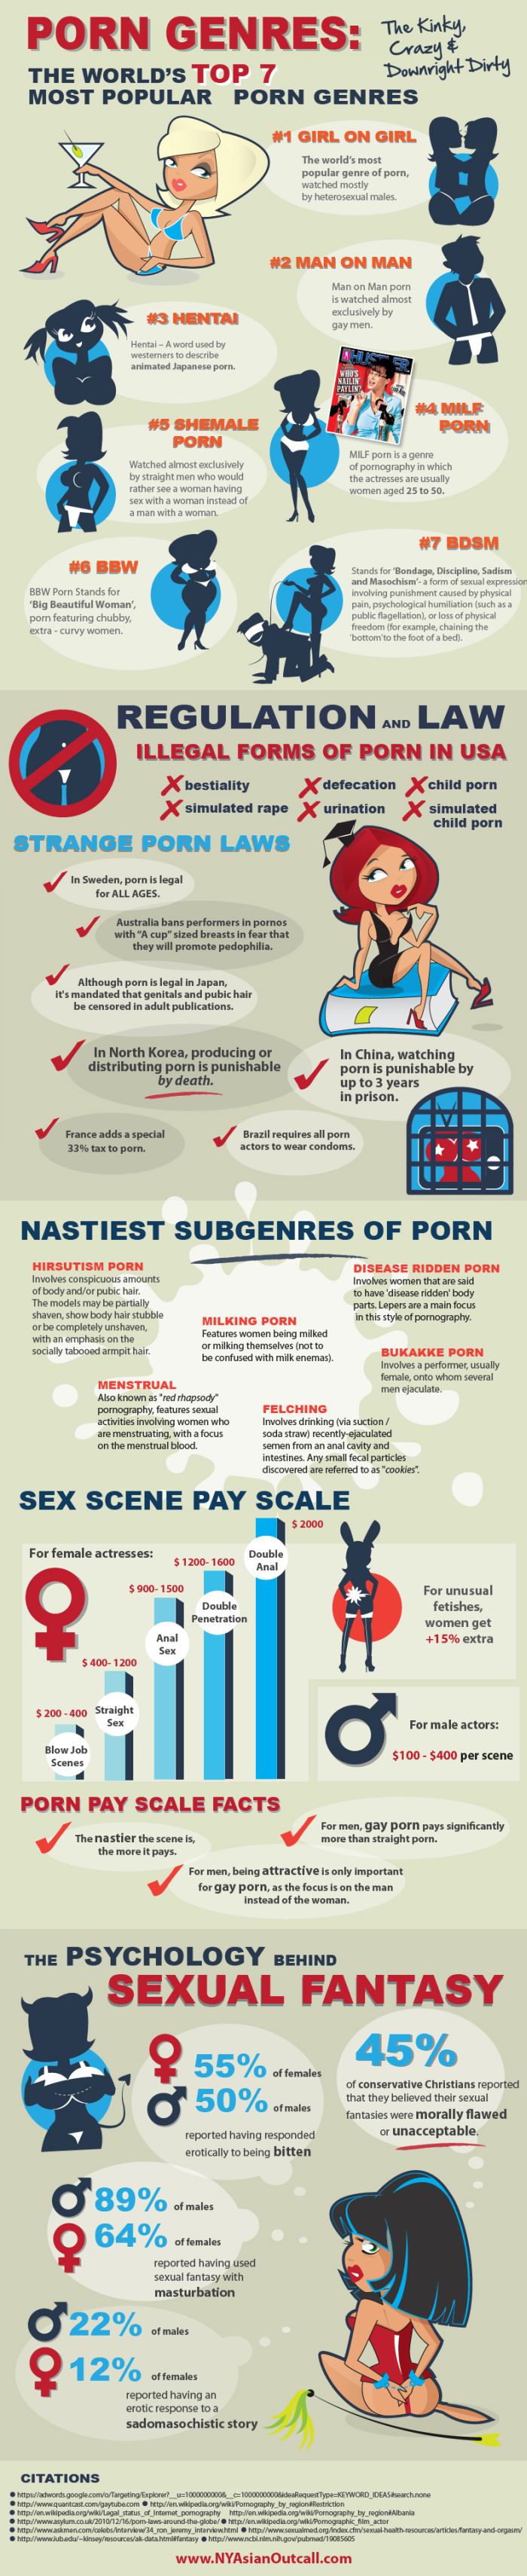 Facts About Adult Movies (infographic)